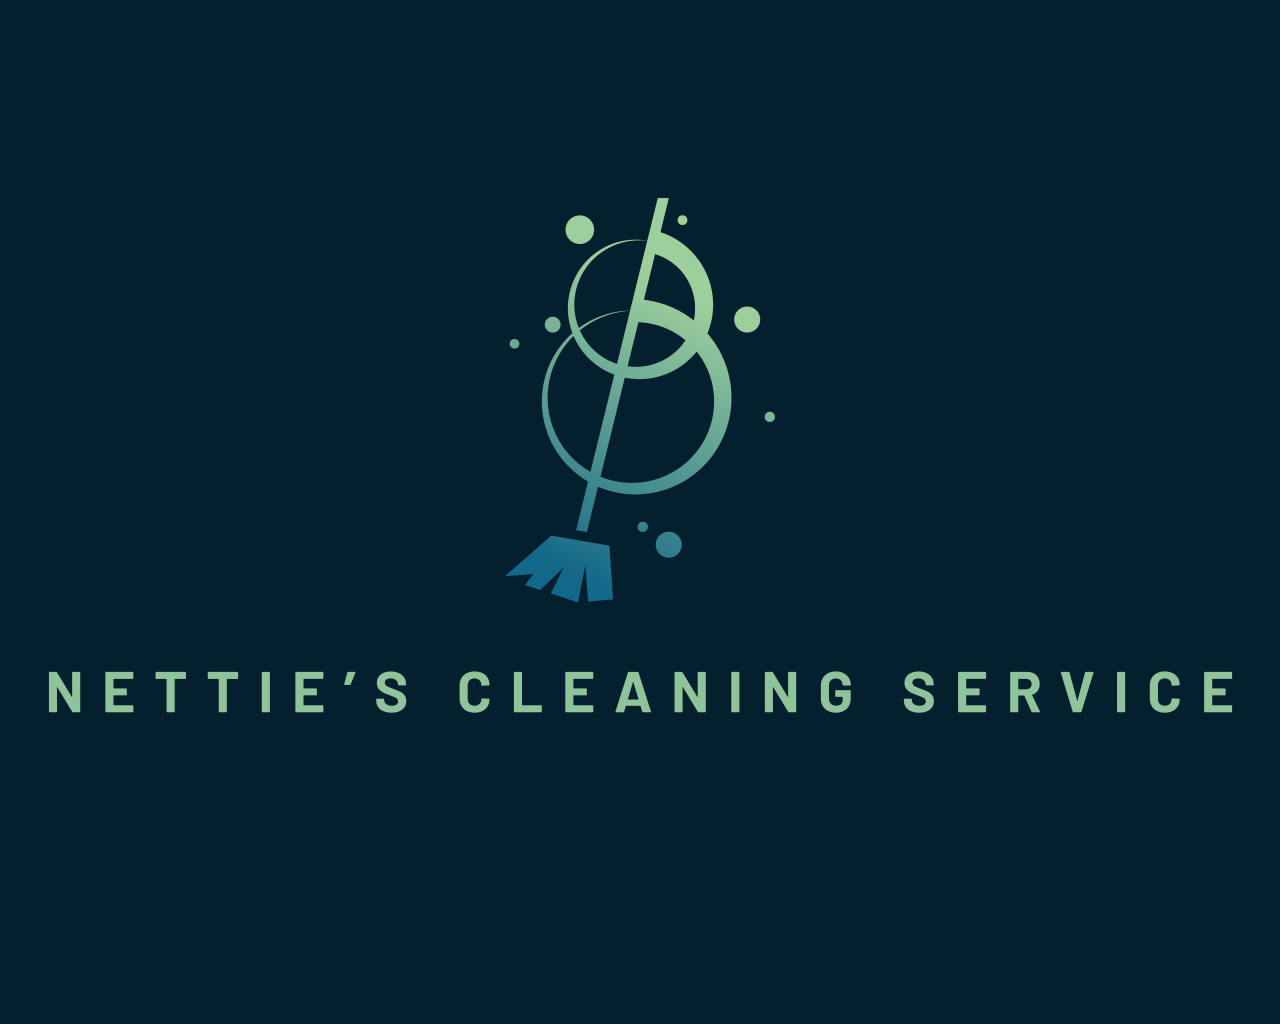 Nettie’s Cleaning Service 's web page